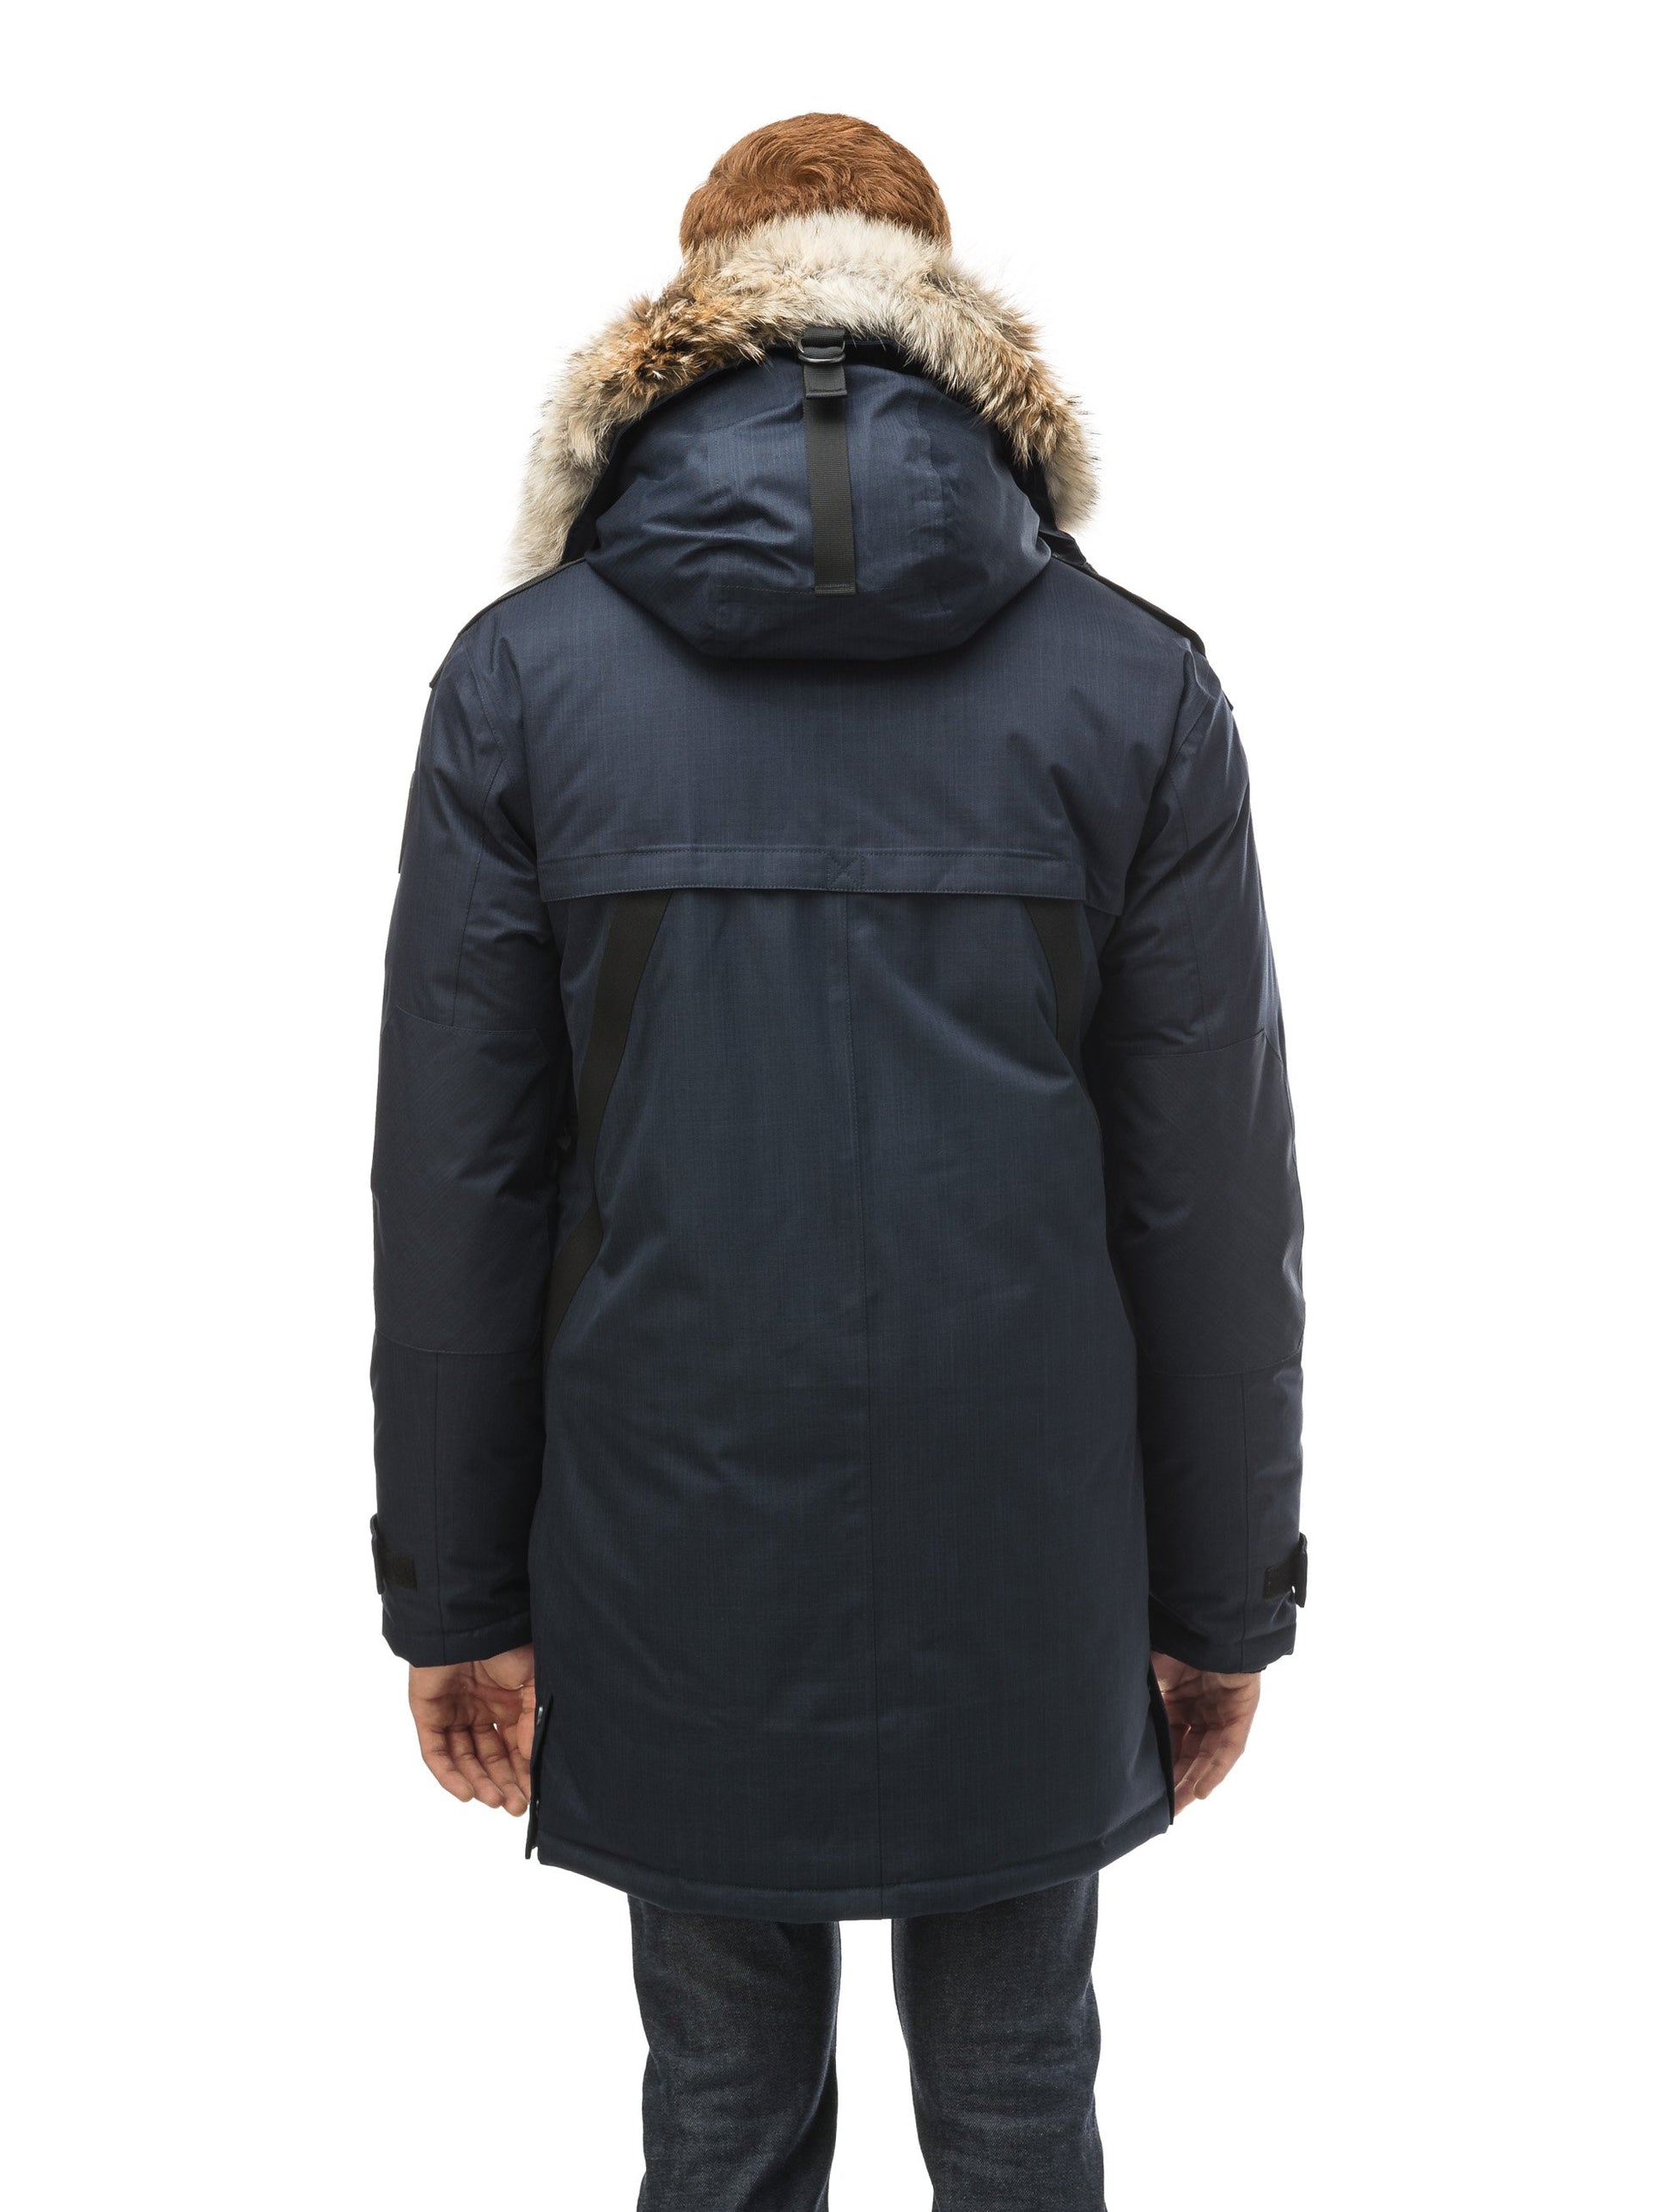 Men's Best Selling Parka the Yatesy is a down filled jacket with a zipper closure and magnetic placket in CH Navy